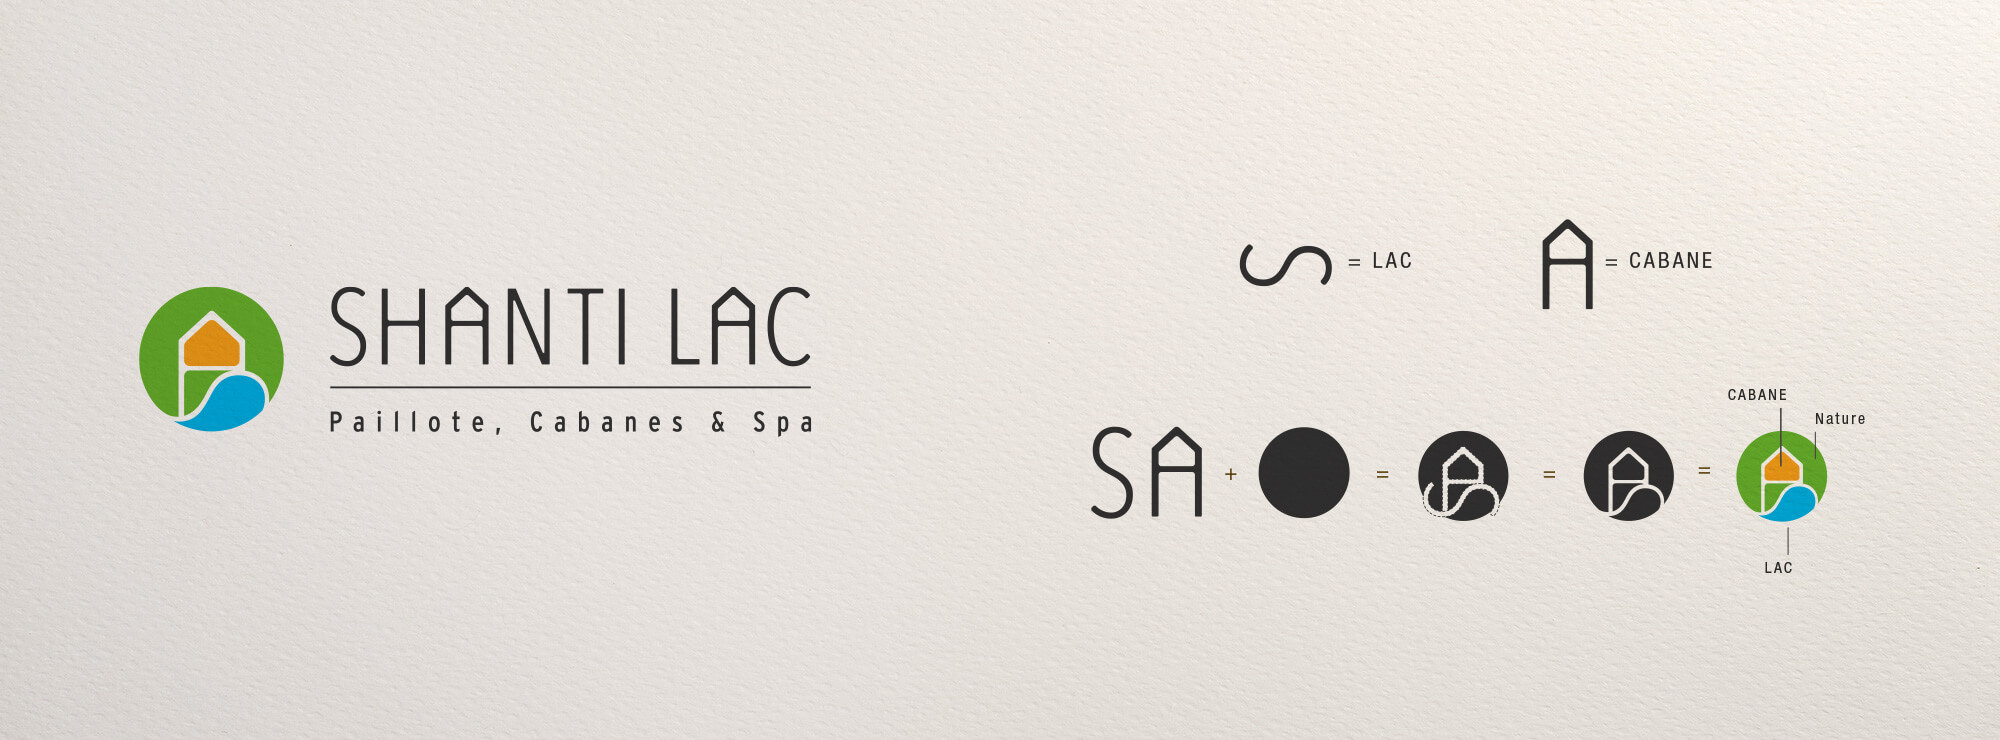 Shanti Lac - a graphic identity very natural